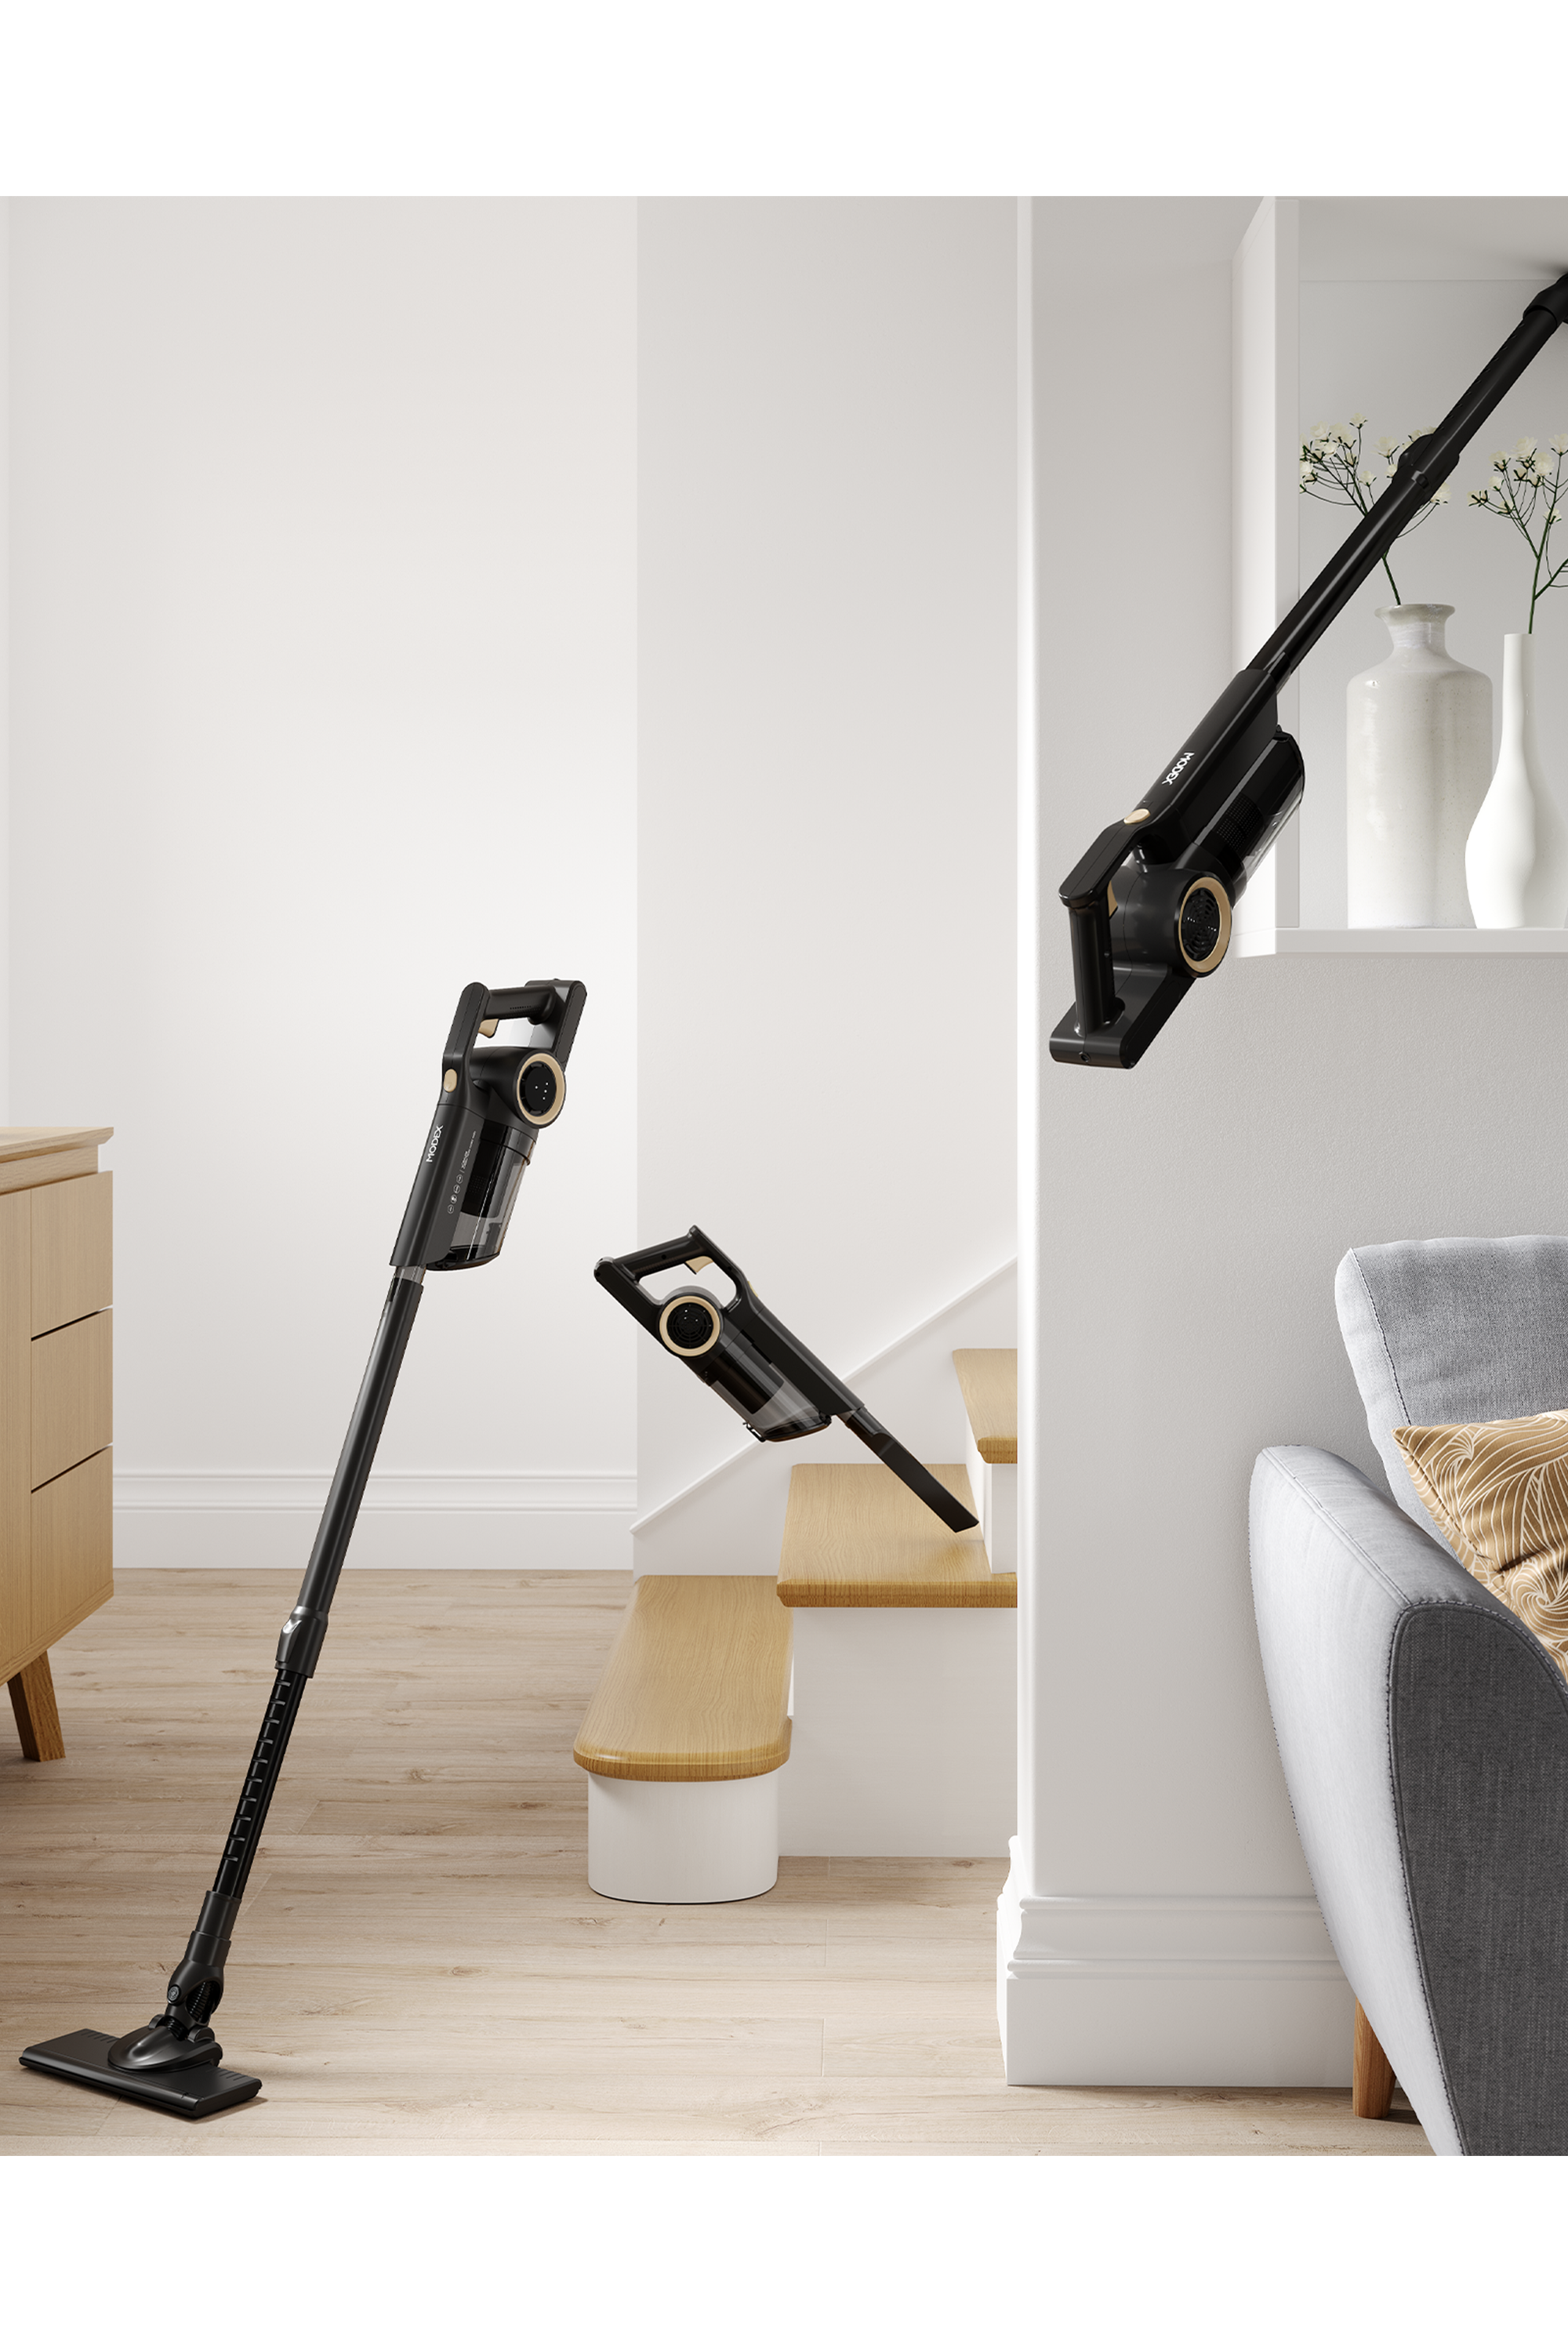 HVC1100 Chargeable 2-in-1 Vacuum Cleaner